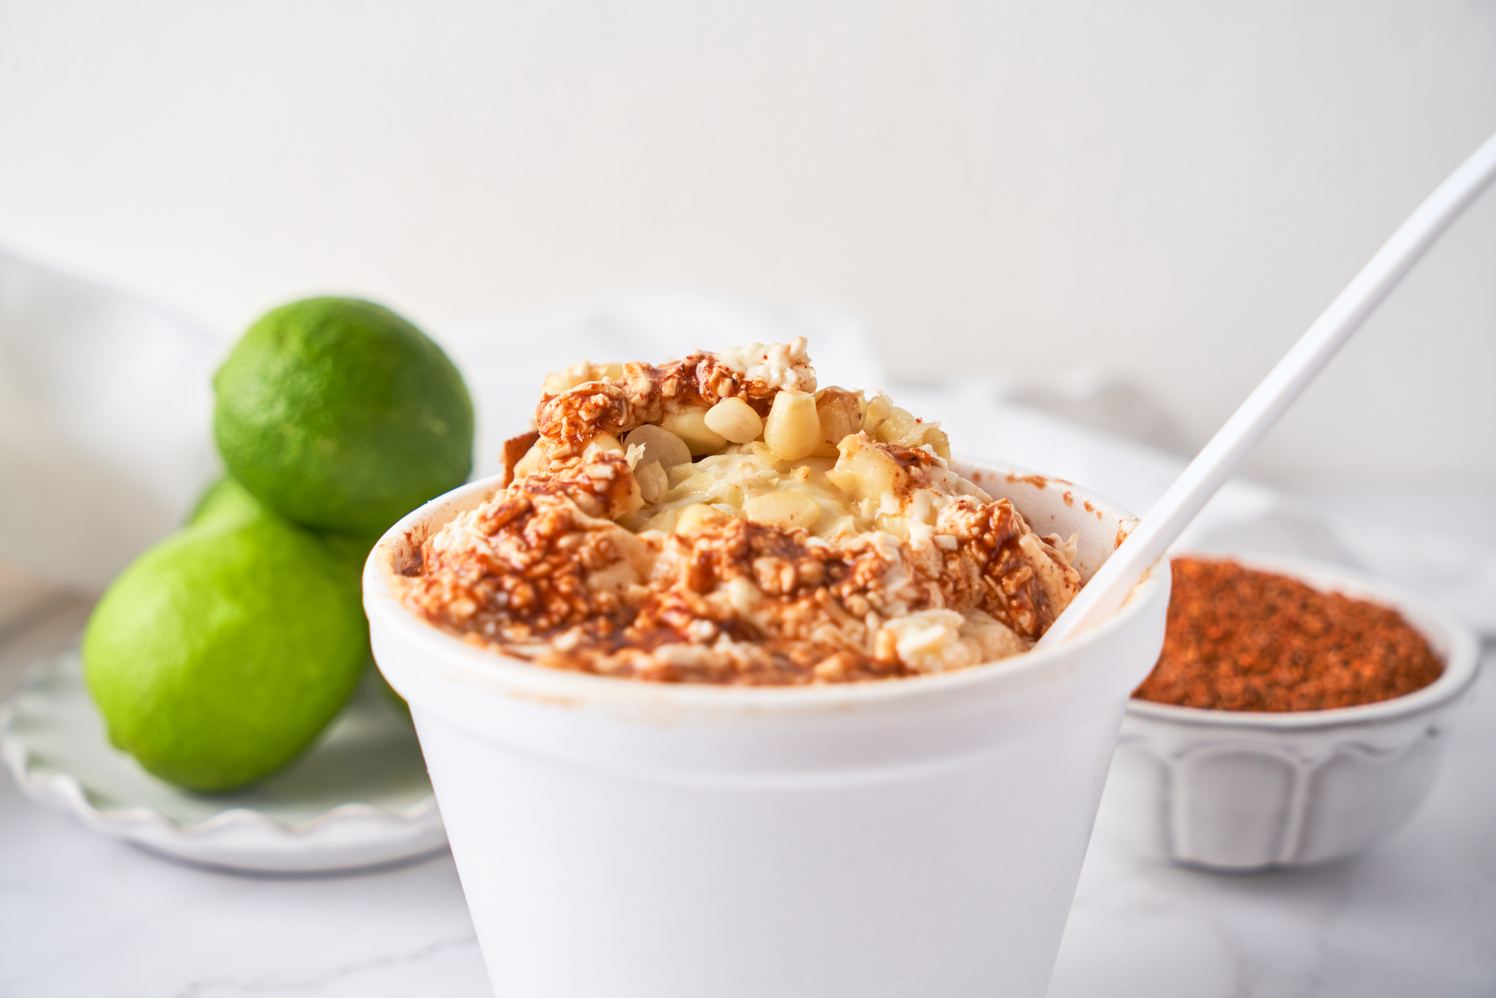 Mexican snack, prepared esquite, corn in a cup, with chili